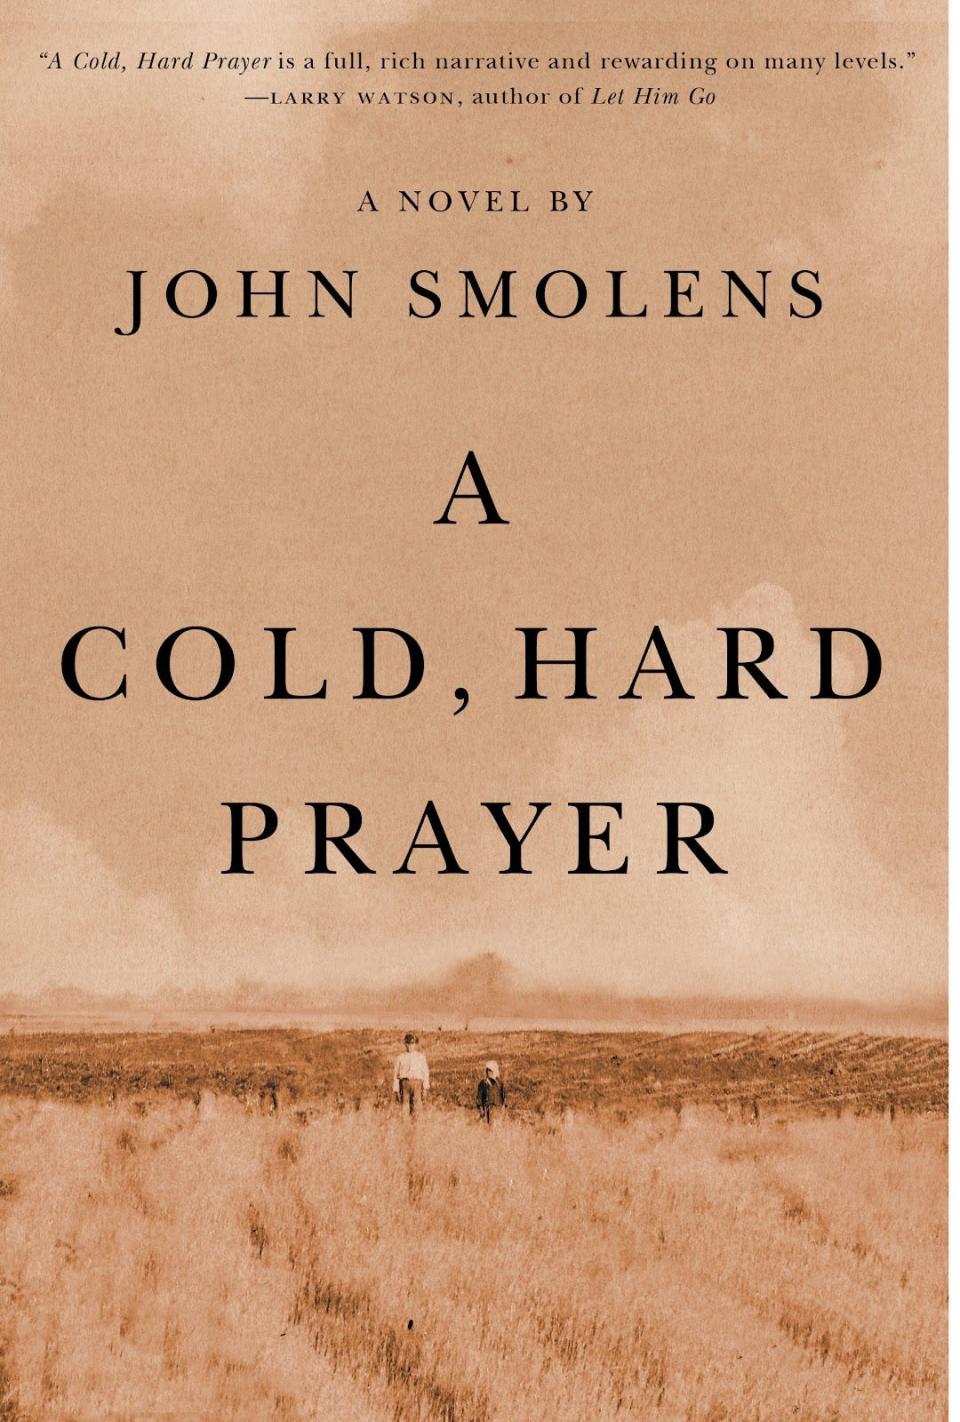 John Smolens is the author of "A Cold, Hard Prayer."